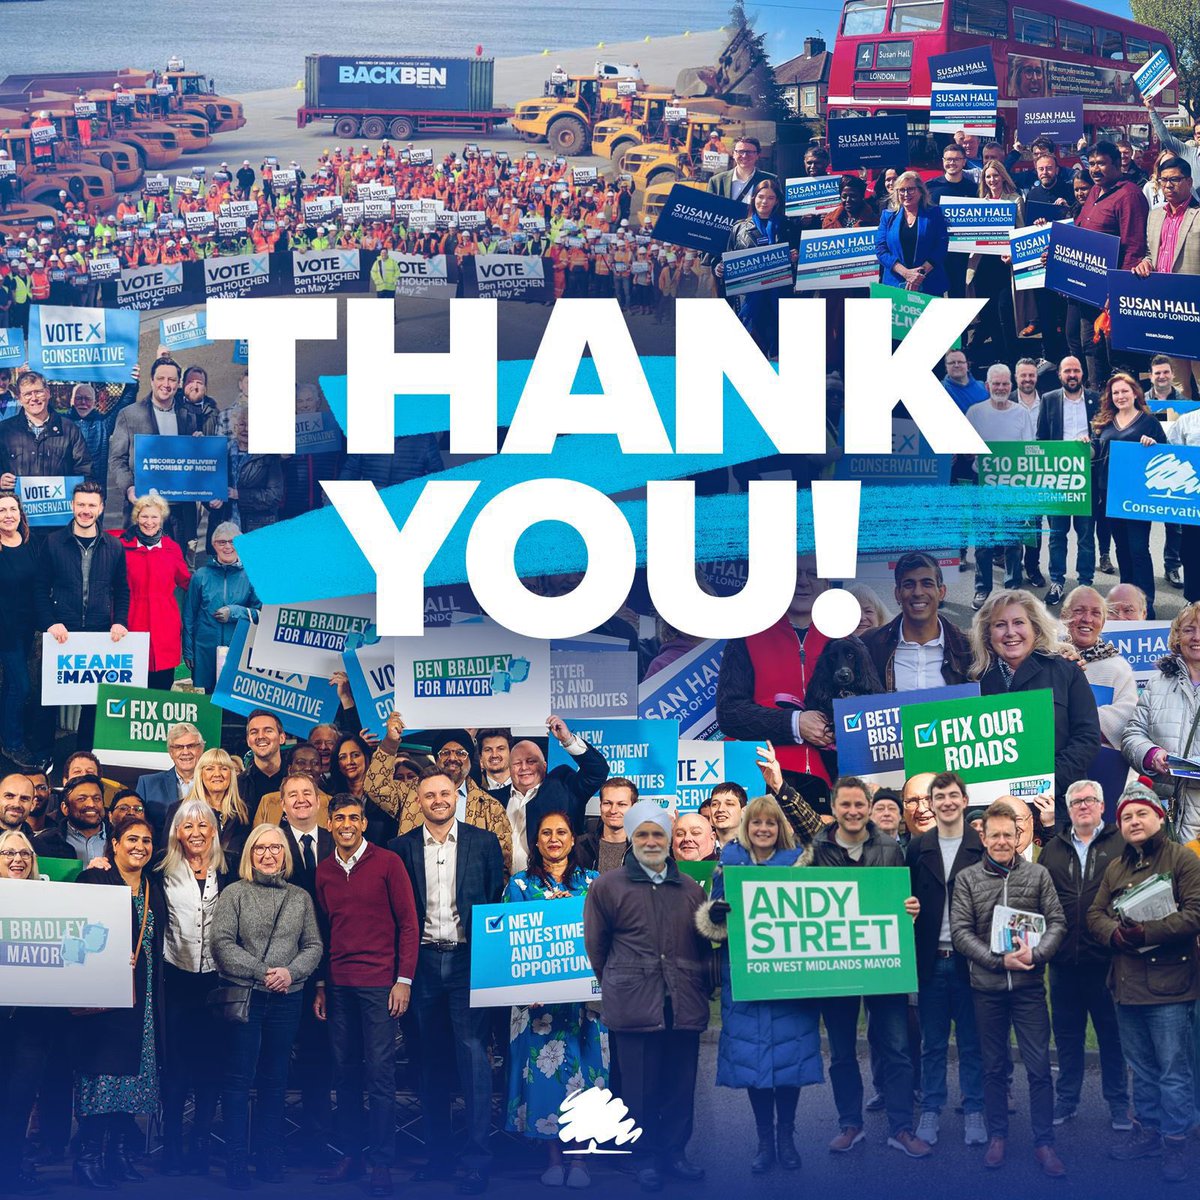 To every voter and volunteer across #Cheshire West and #Chester who supported us today - THANK YOU!